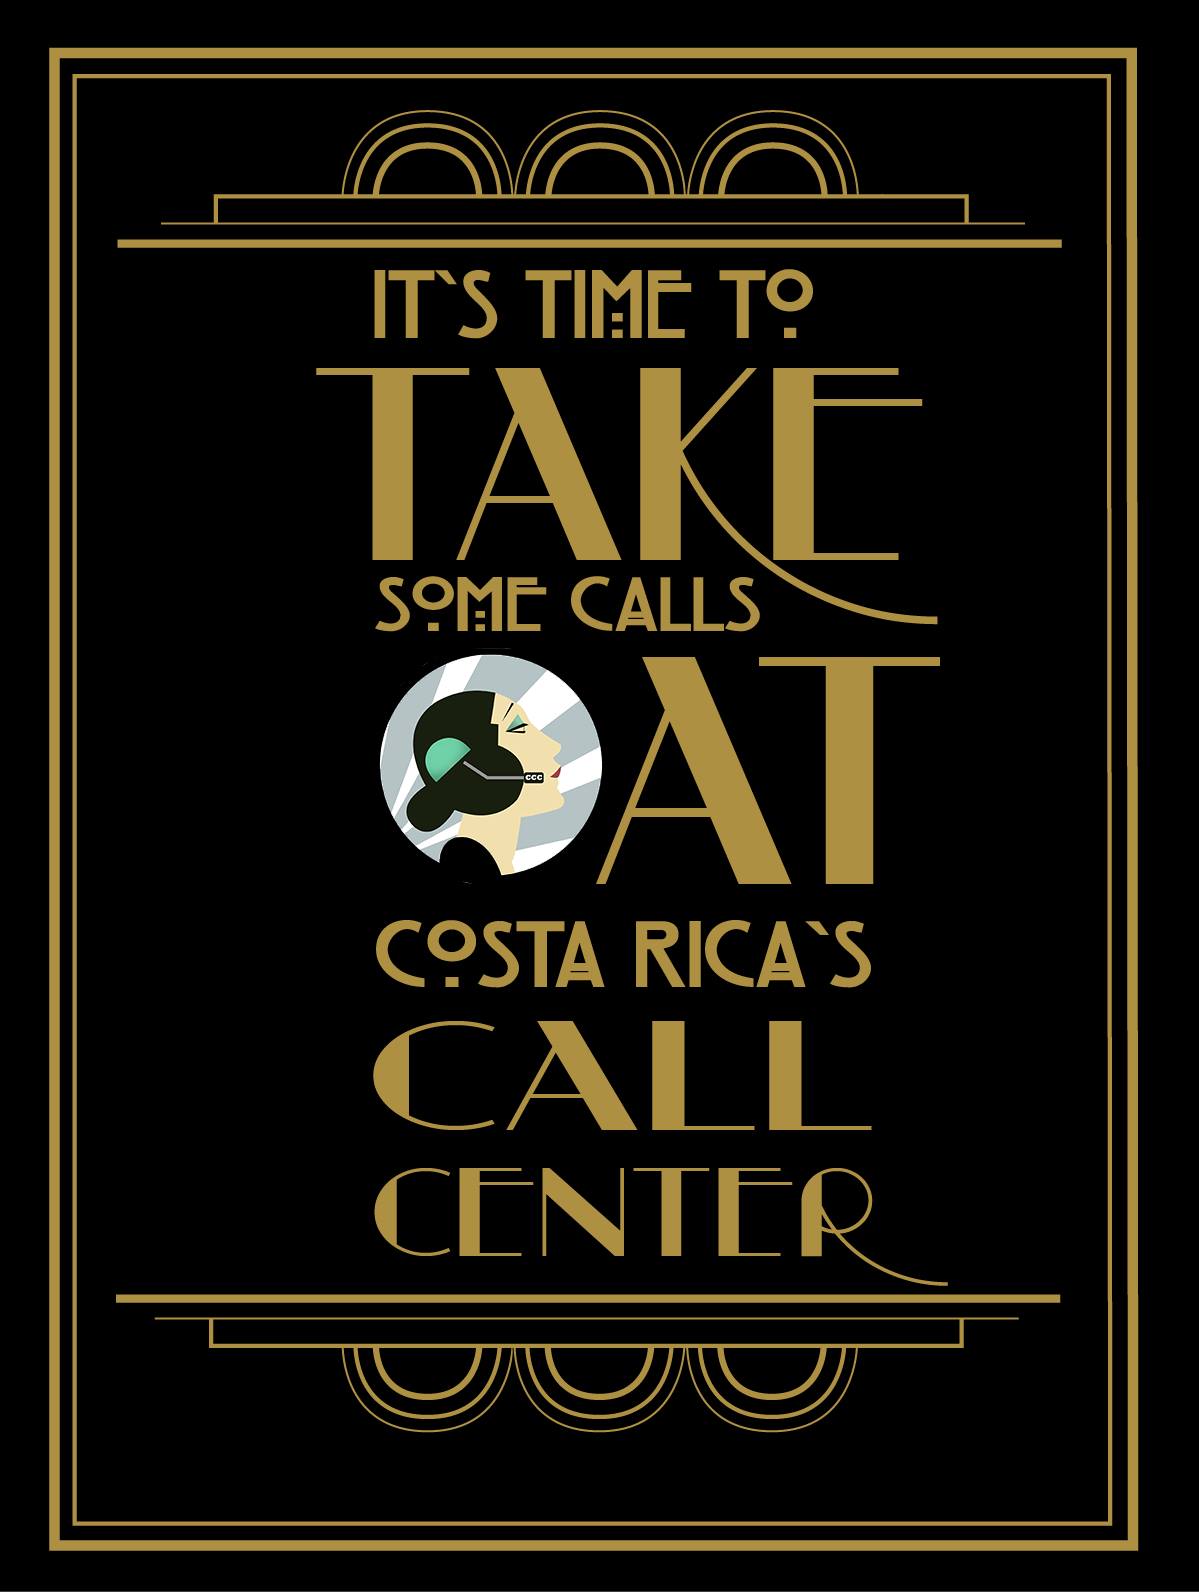 LATIN AMERICA CALL CENTER COSTA RICA WORK.jpg THE OUTSOURCING INDUSTRY ACKNOWLEDGES A 10 YEAR ANNIVERSARY FOR COSTA RICA'S CALL CENTER. by richardblank